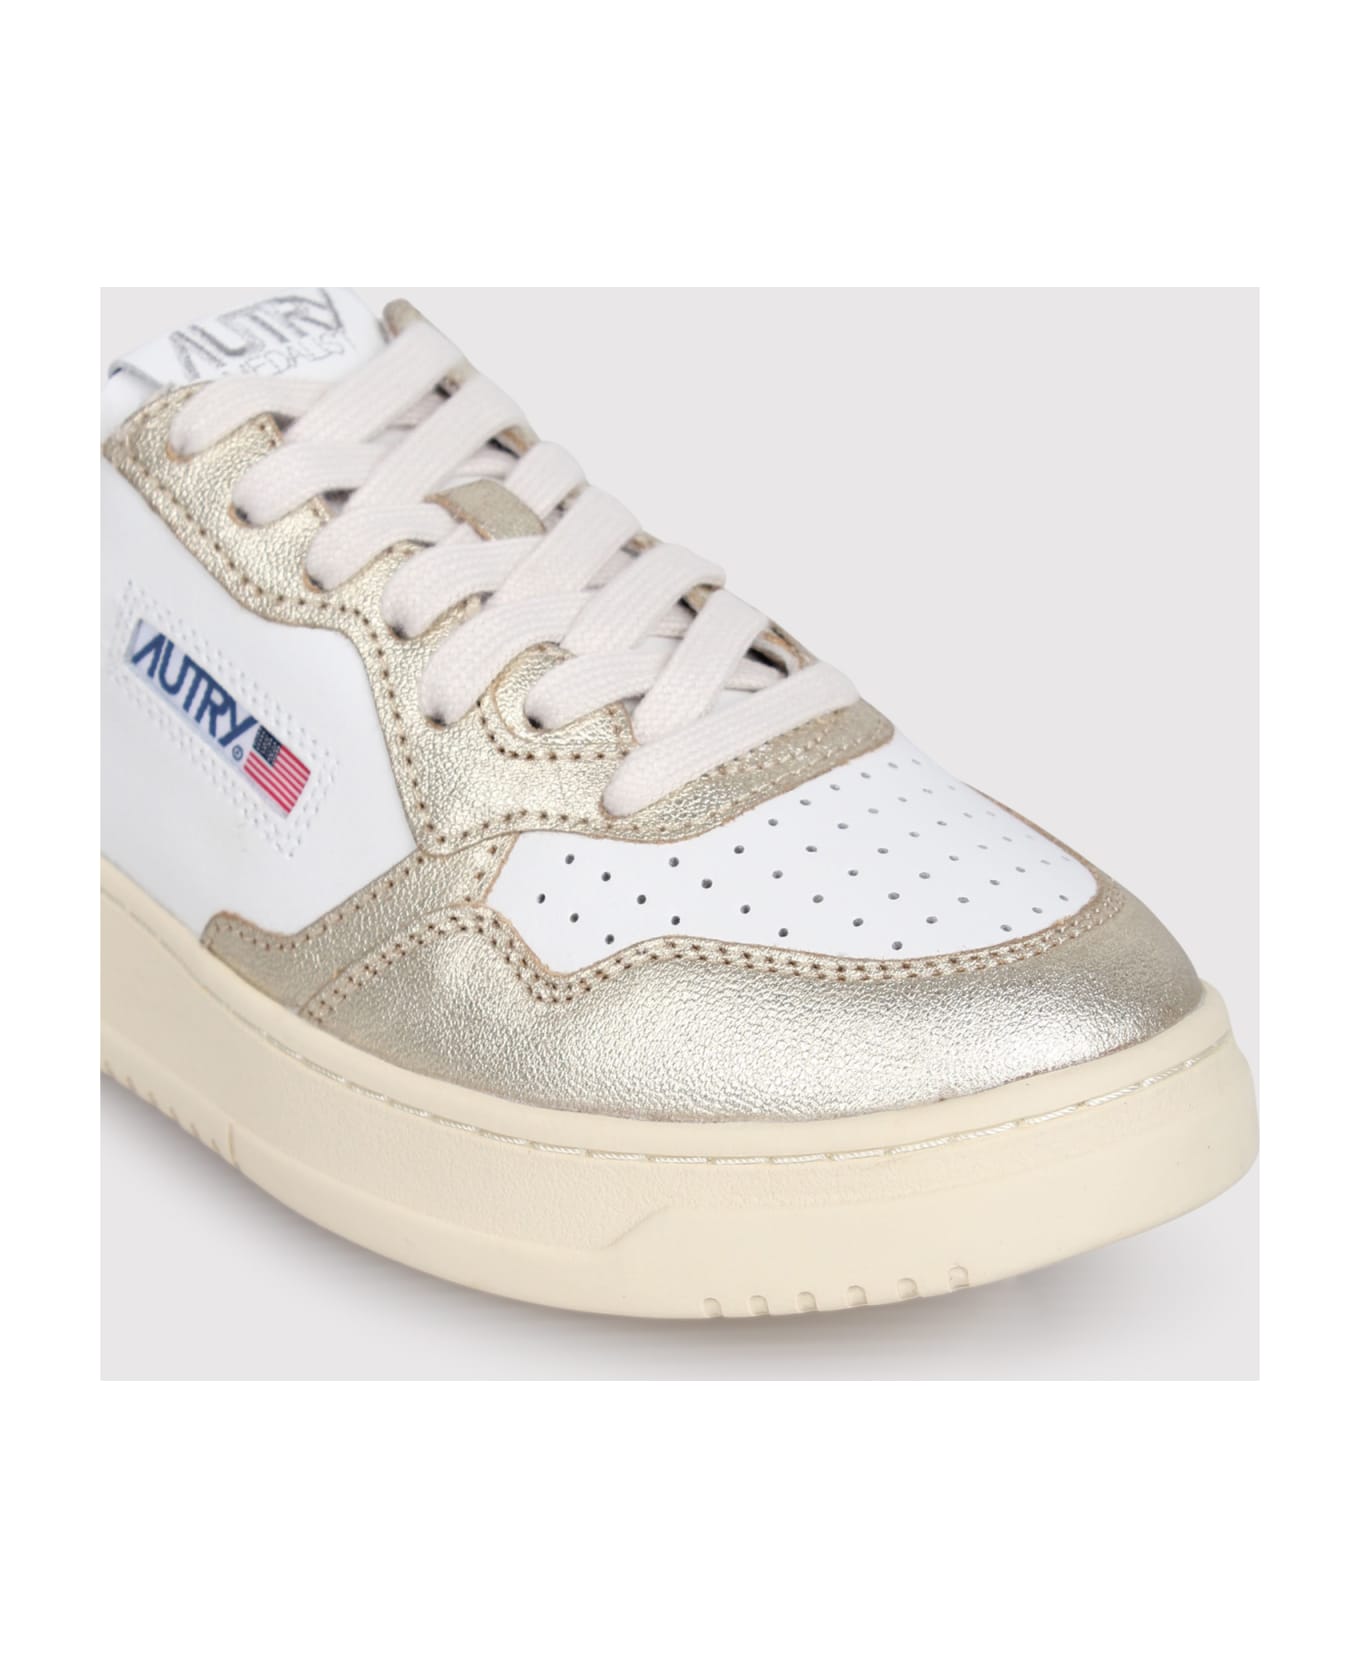 Autry Medalist Mule Low Sneakers In White Leather And Platinum スニーカー